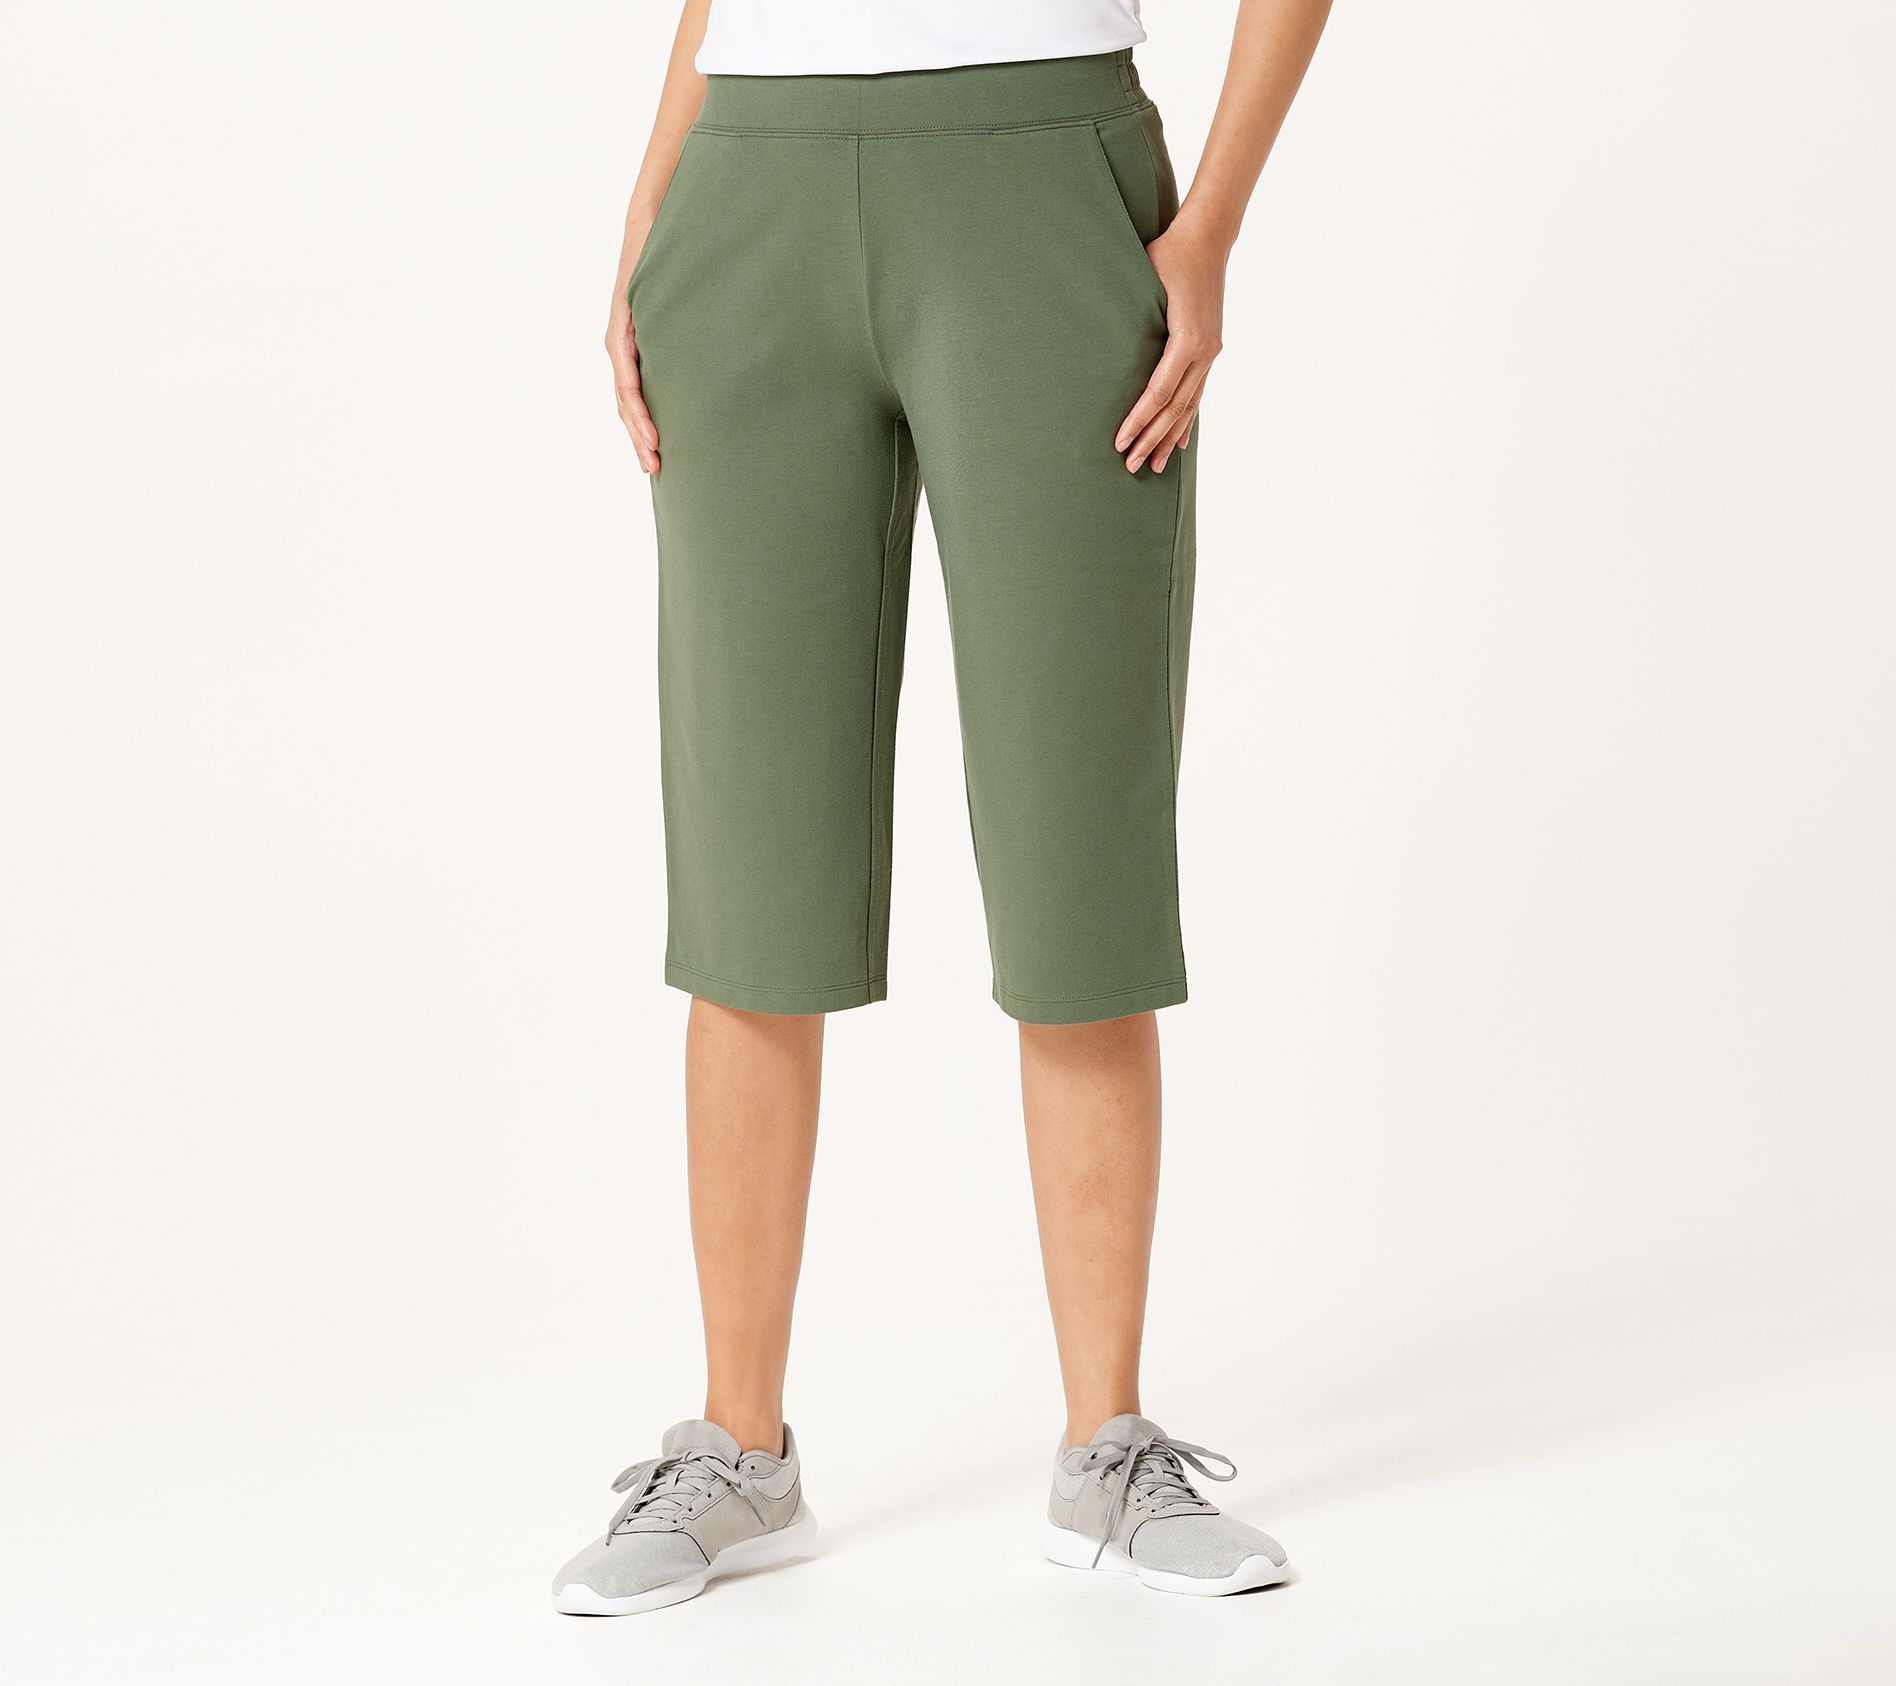 Denim & Co. Active Duo Stretch Skimmer Length Pants 